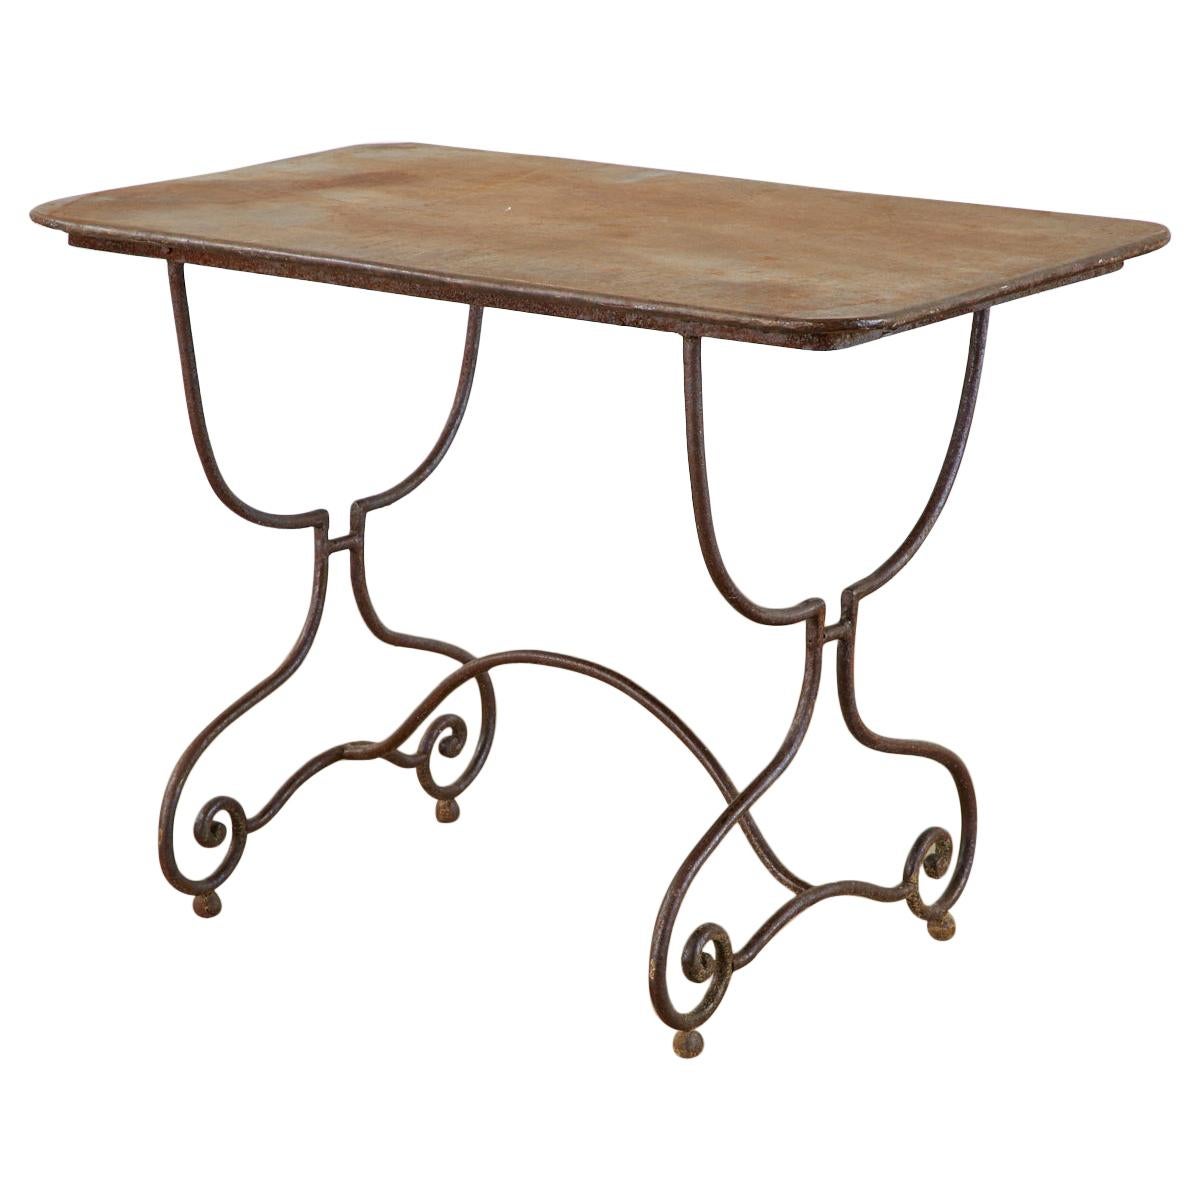 French Art Nouveau Iron Bistro Dining Table